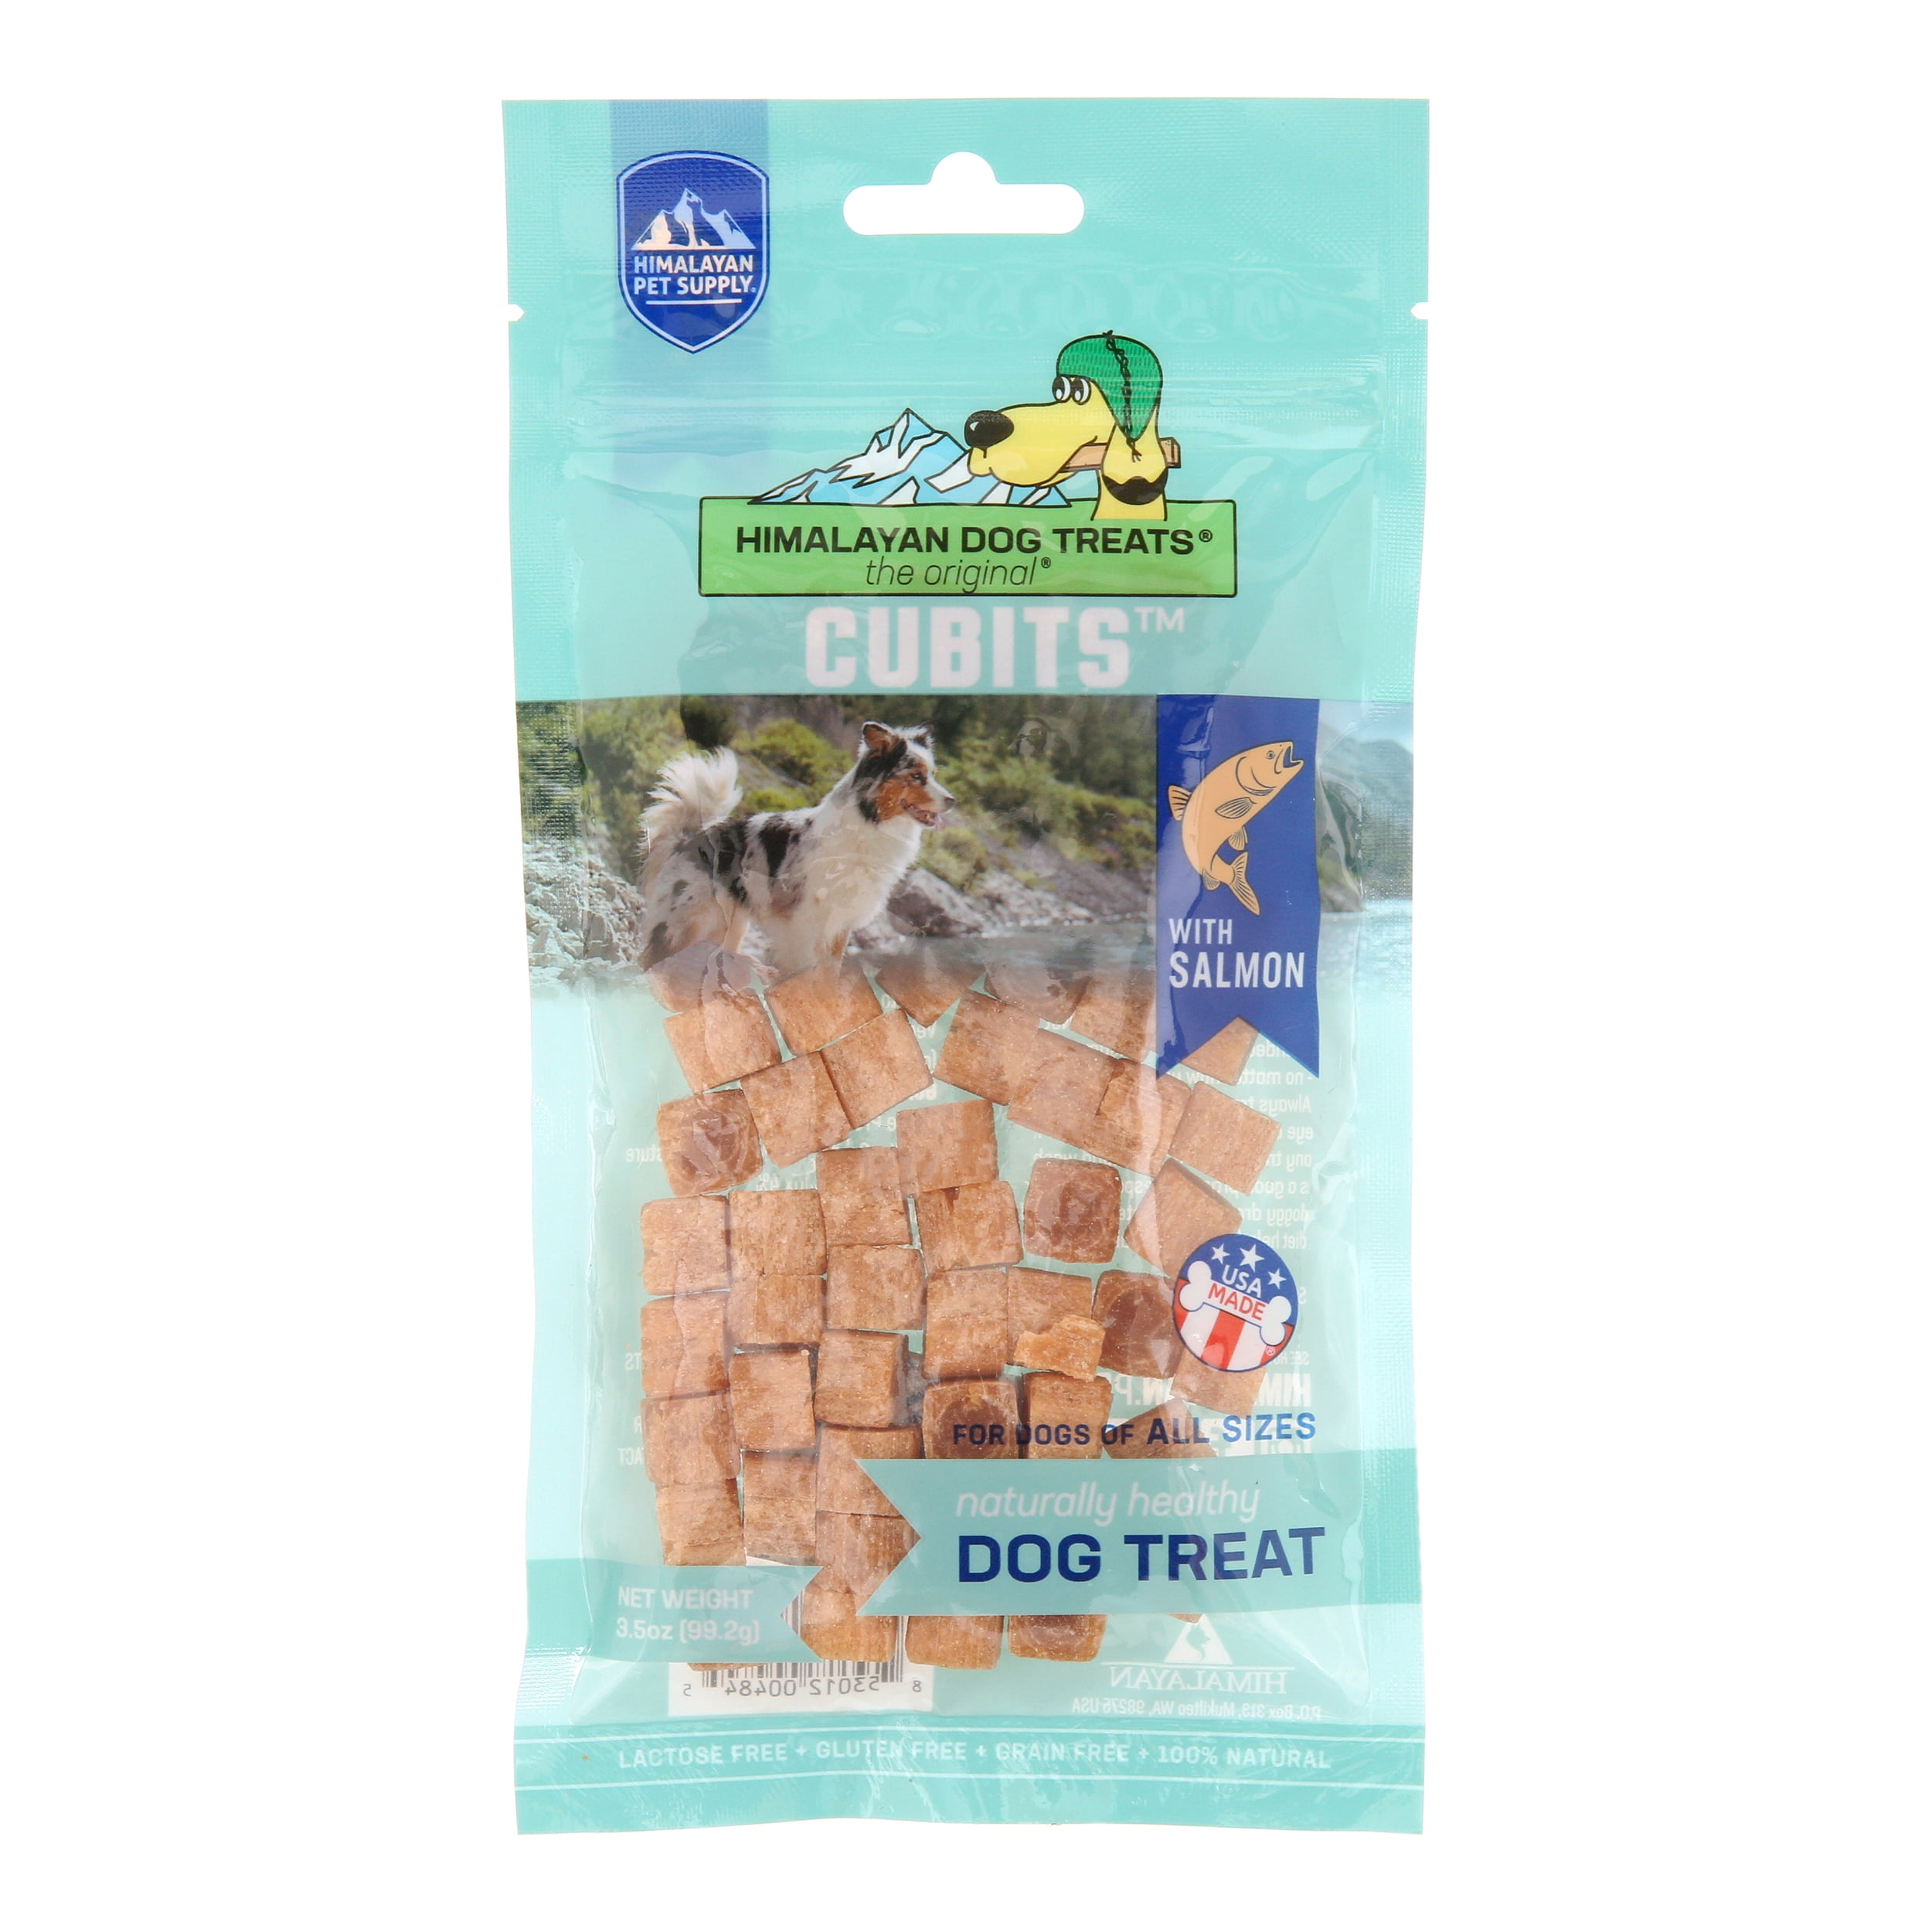 Gluten No Lactose Protein Rich Stain Free Himalayan Pet supply Dog Chew Bone Small Long Lasting Healthy & Safe for Dogs 30 lbs and Under Low Odor 100% Natural Soy or Grains